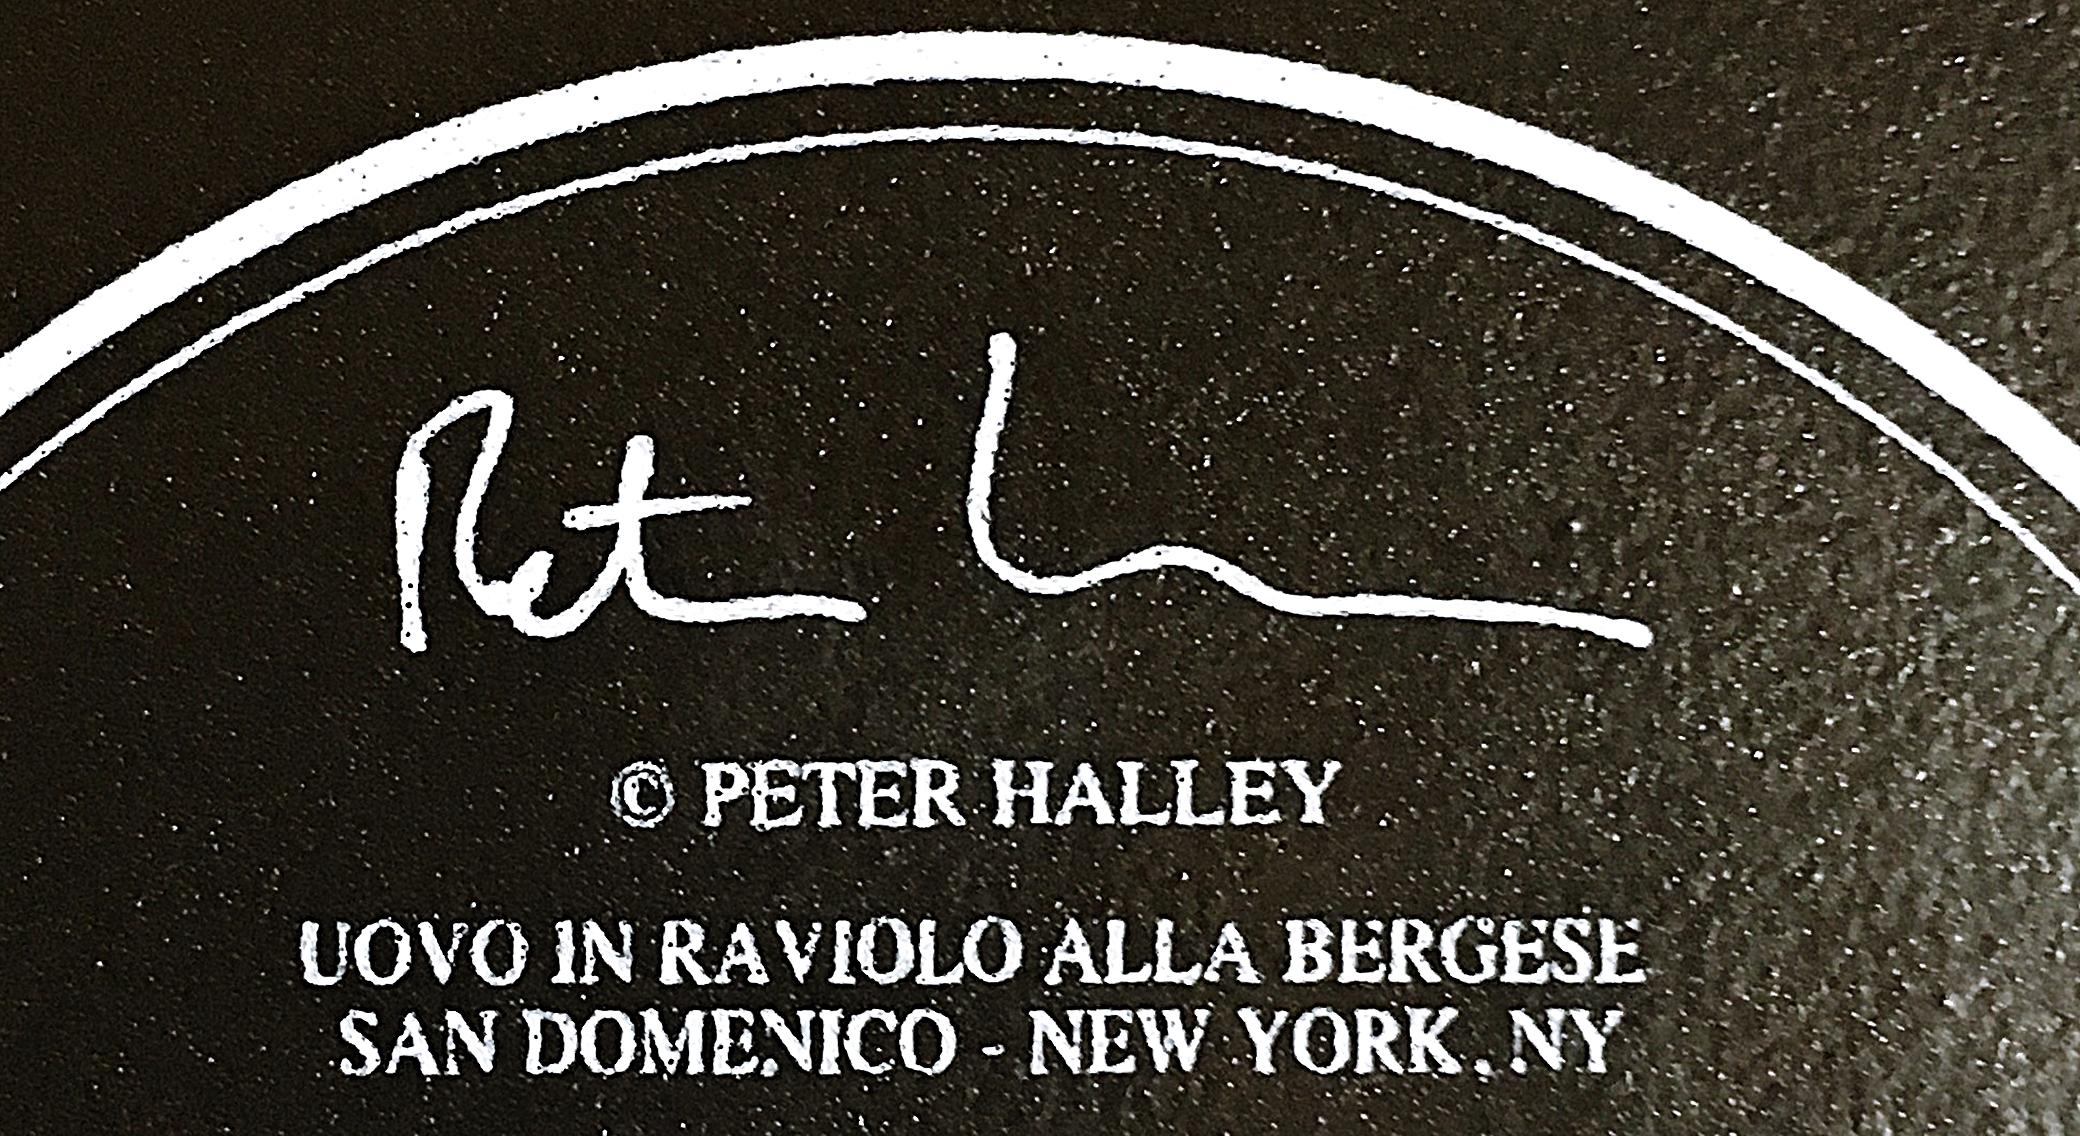 Uovo In Raviolo Alla Bergese - San Domenico - New York, NY - Abstract Geometric Mixed Media Art by Peter Halley